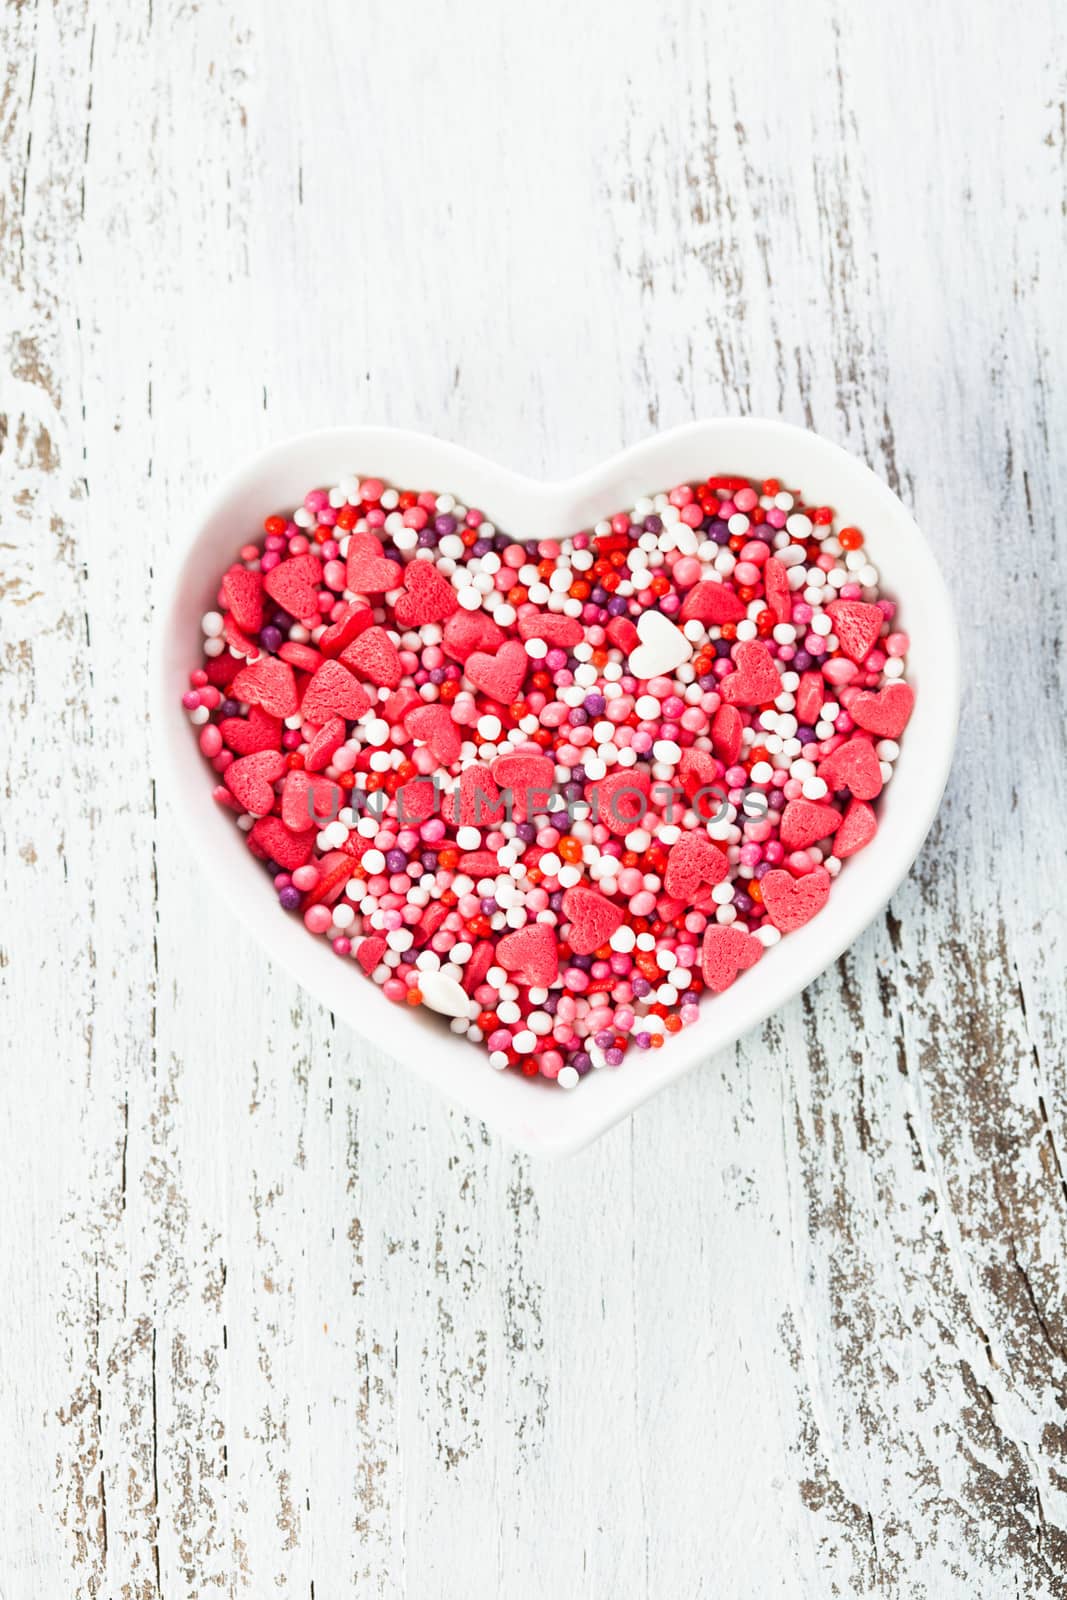 Sugar hearts in the plate - Valentine cake decorations